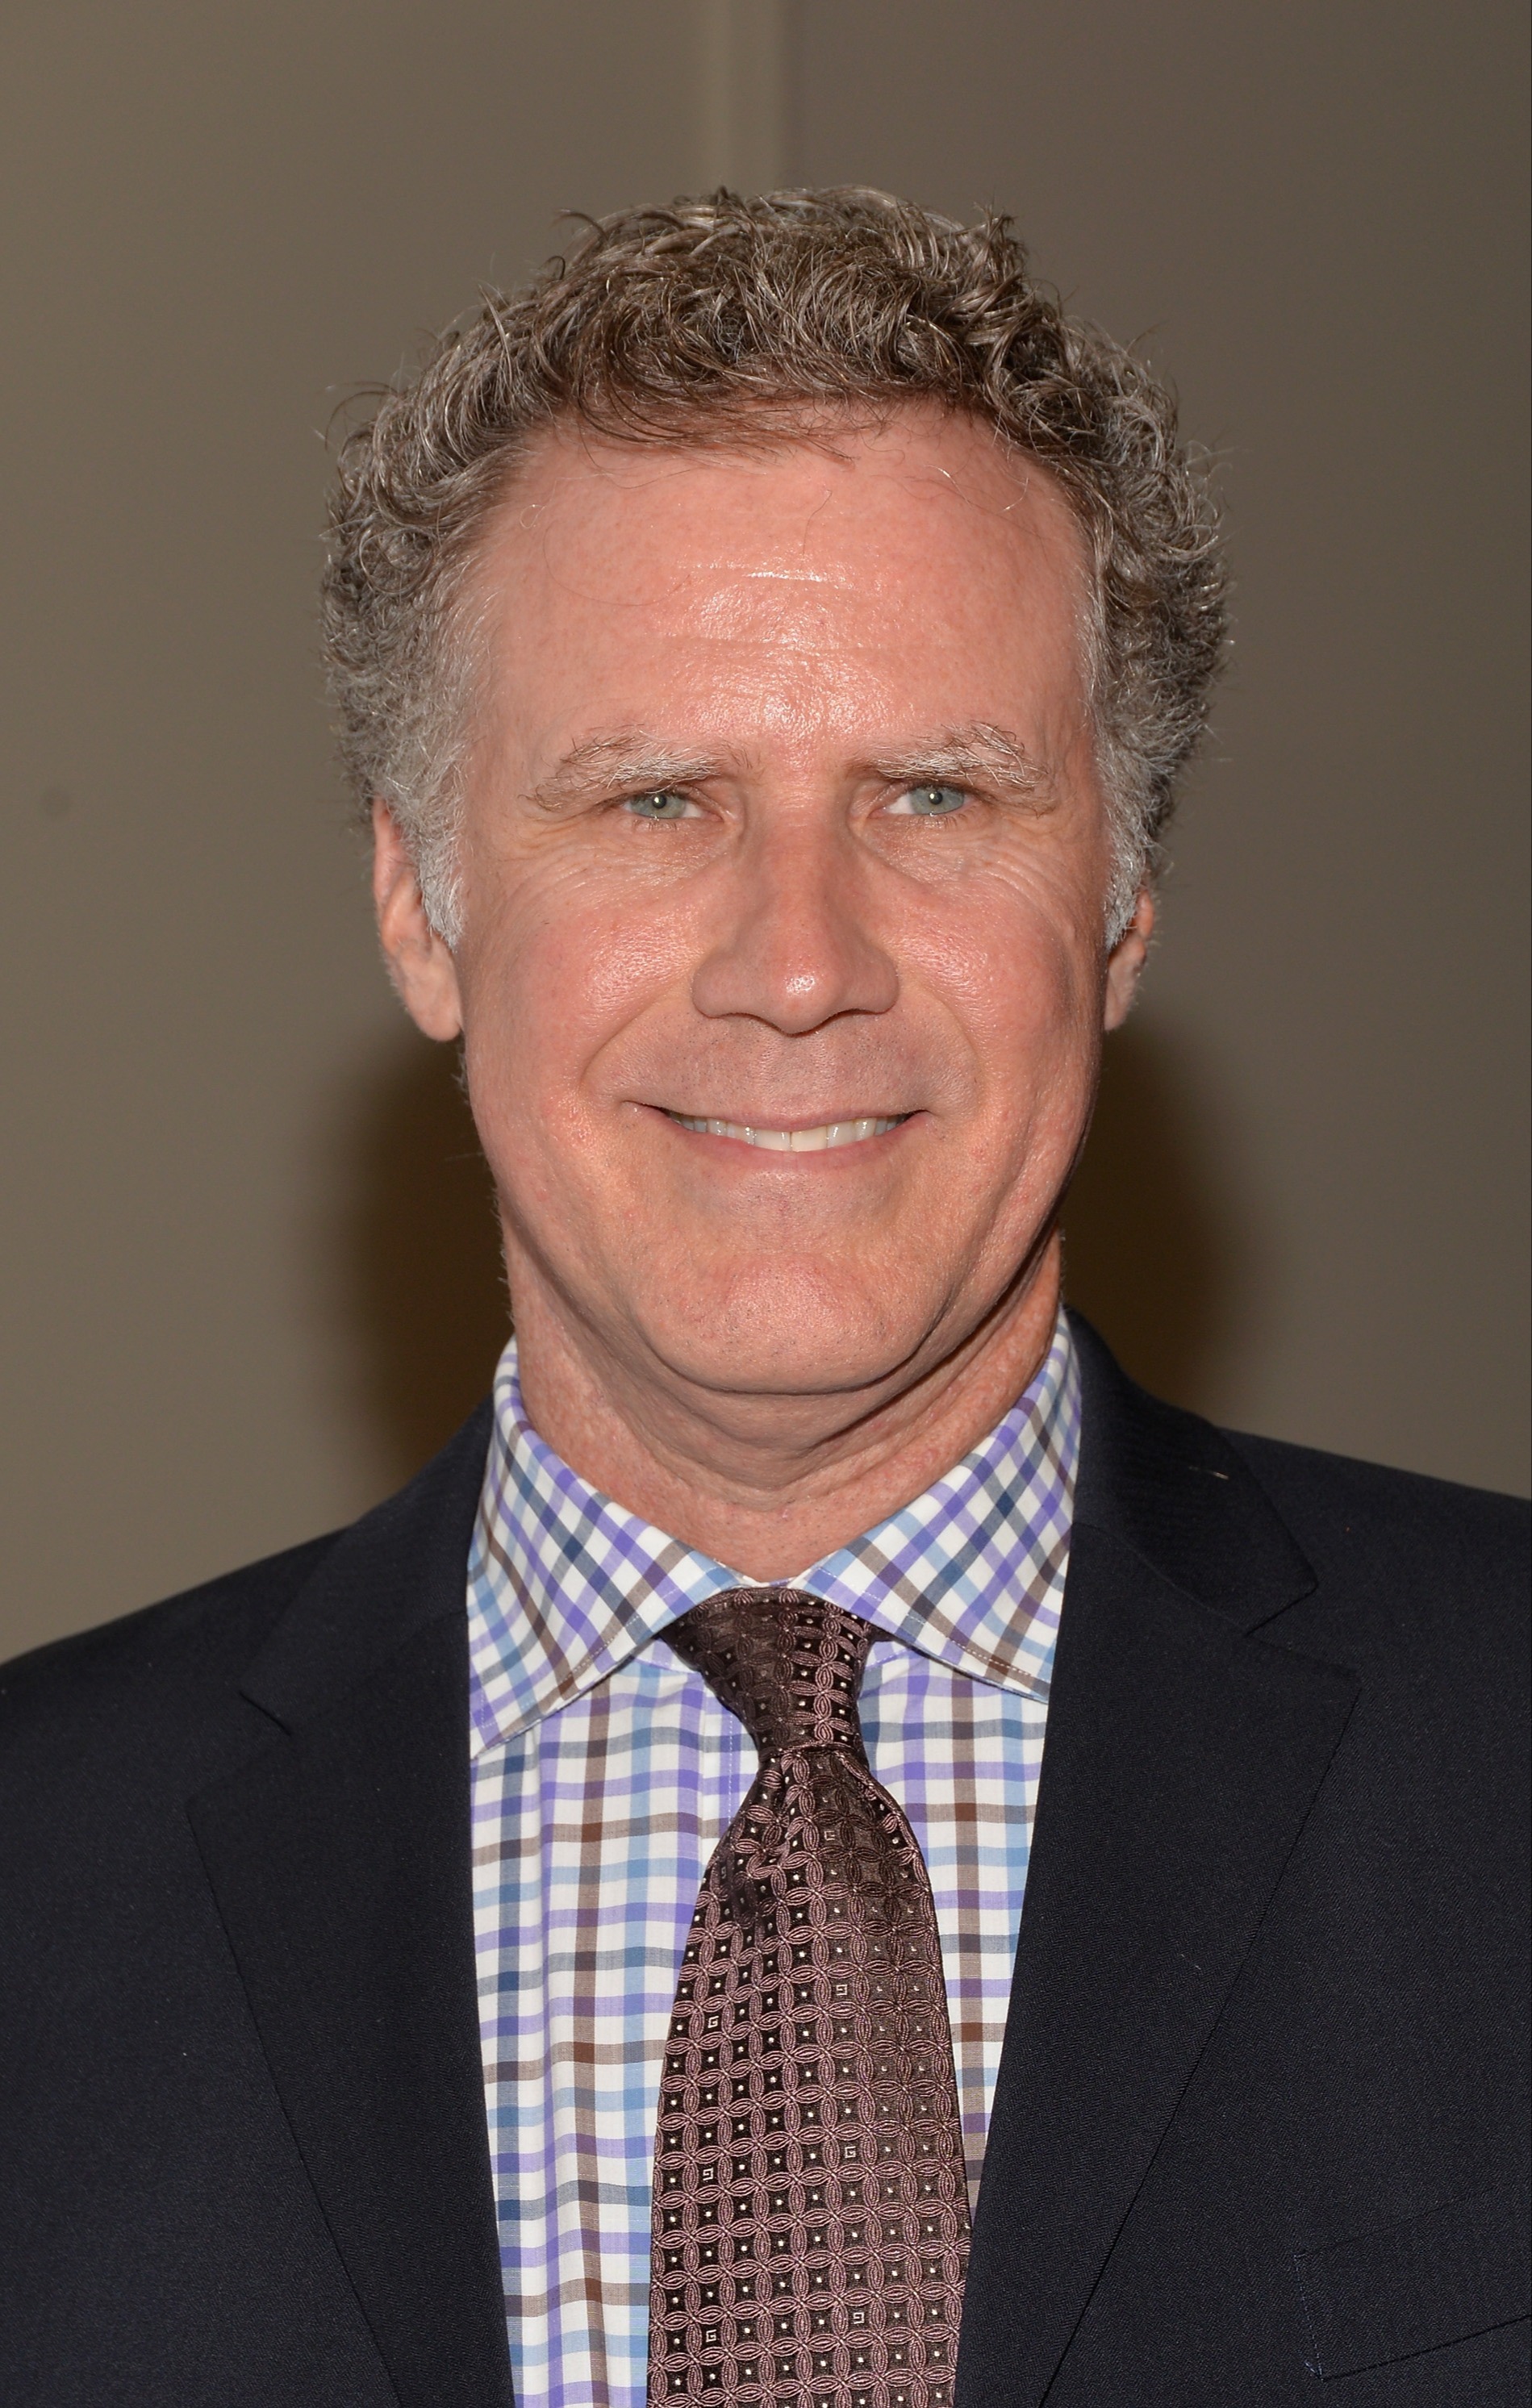 Will Ferrell recently revealed that his legal first name is John and opened up about how embarrassed he was to correct his teachers on the first day of school